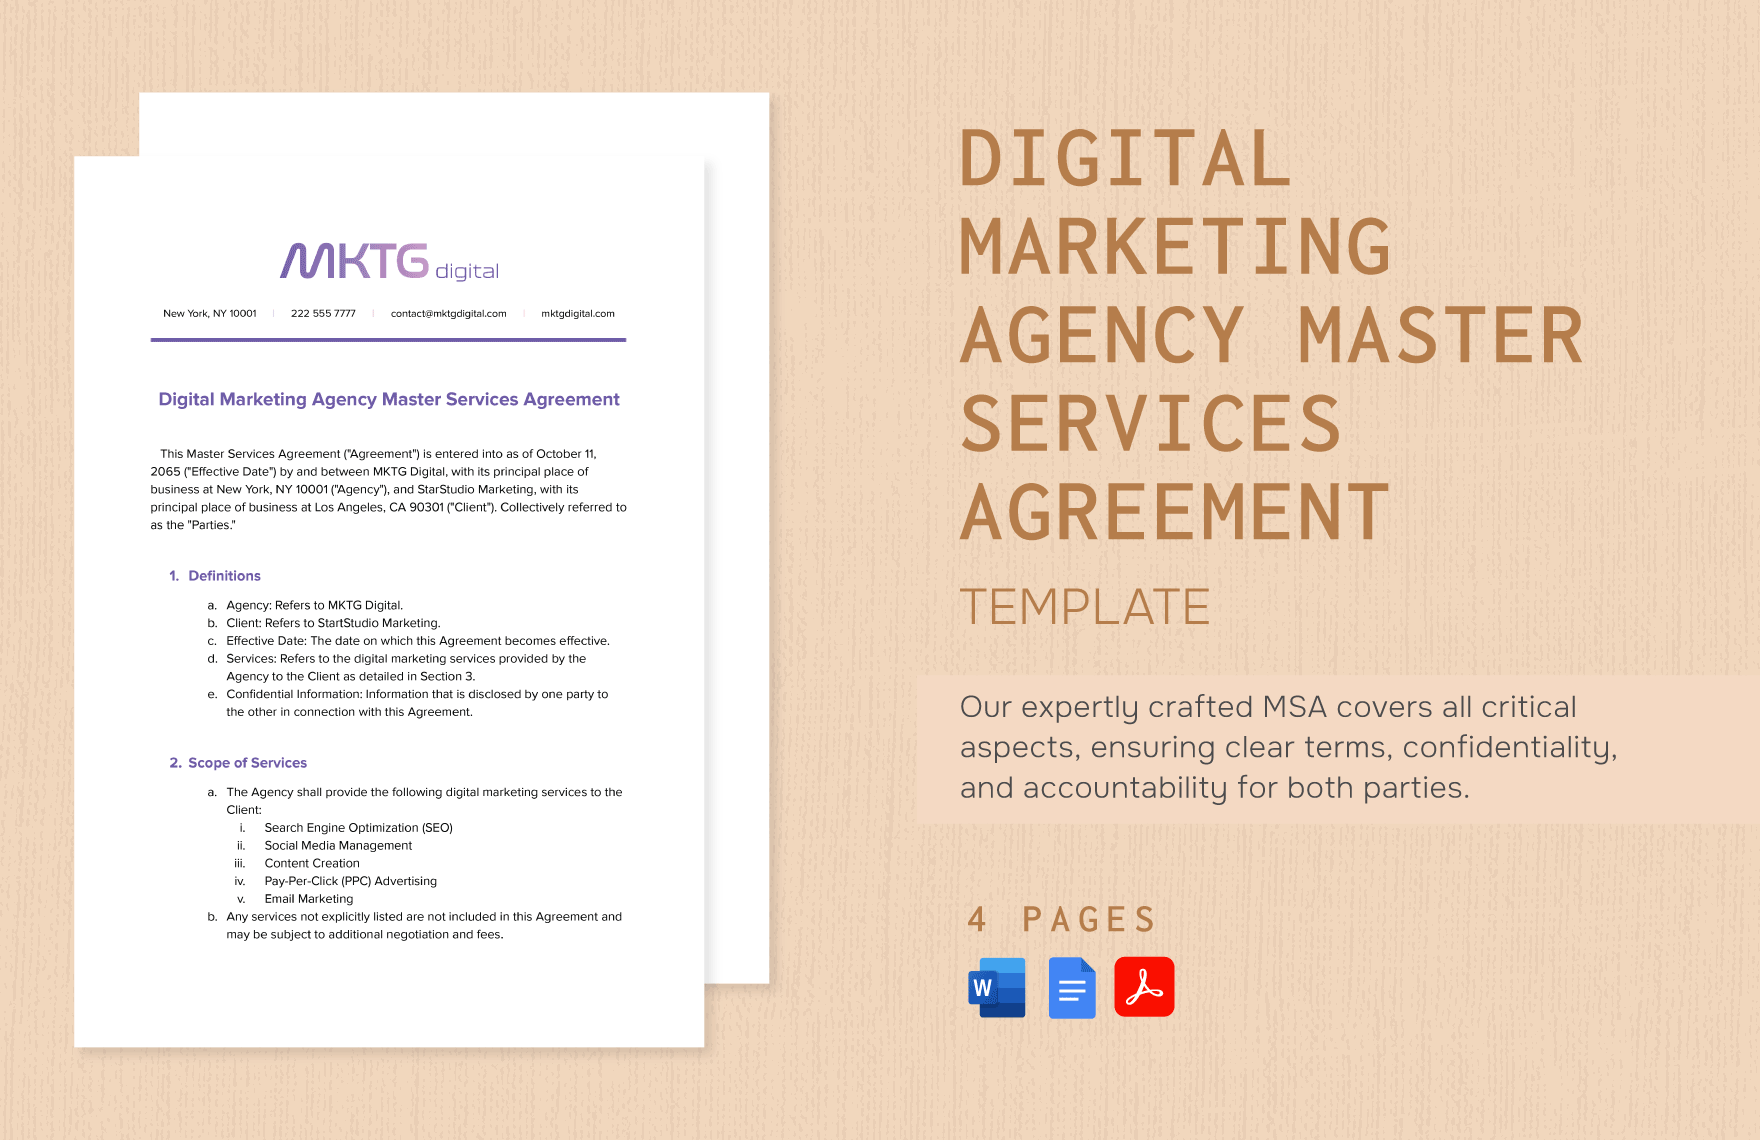 Digital Marketing Agency Master Services Agreement Template